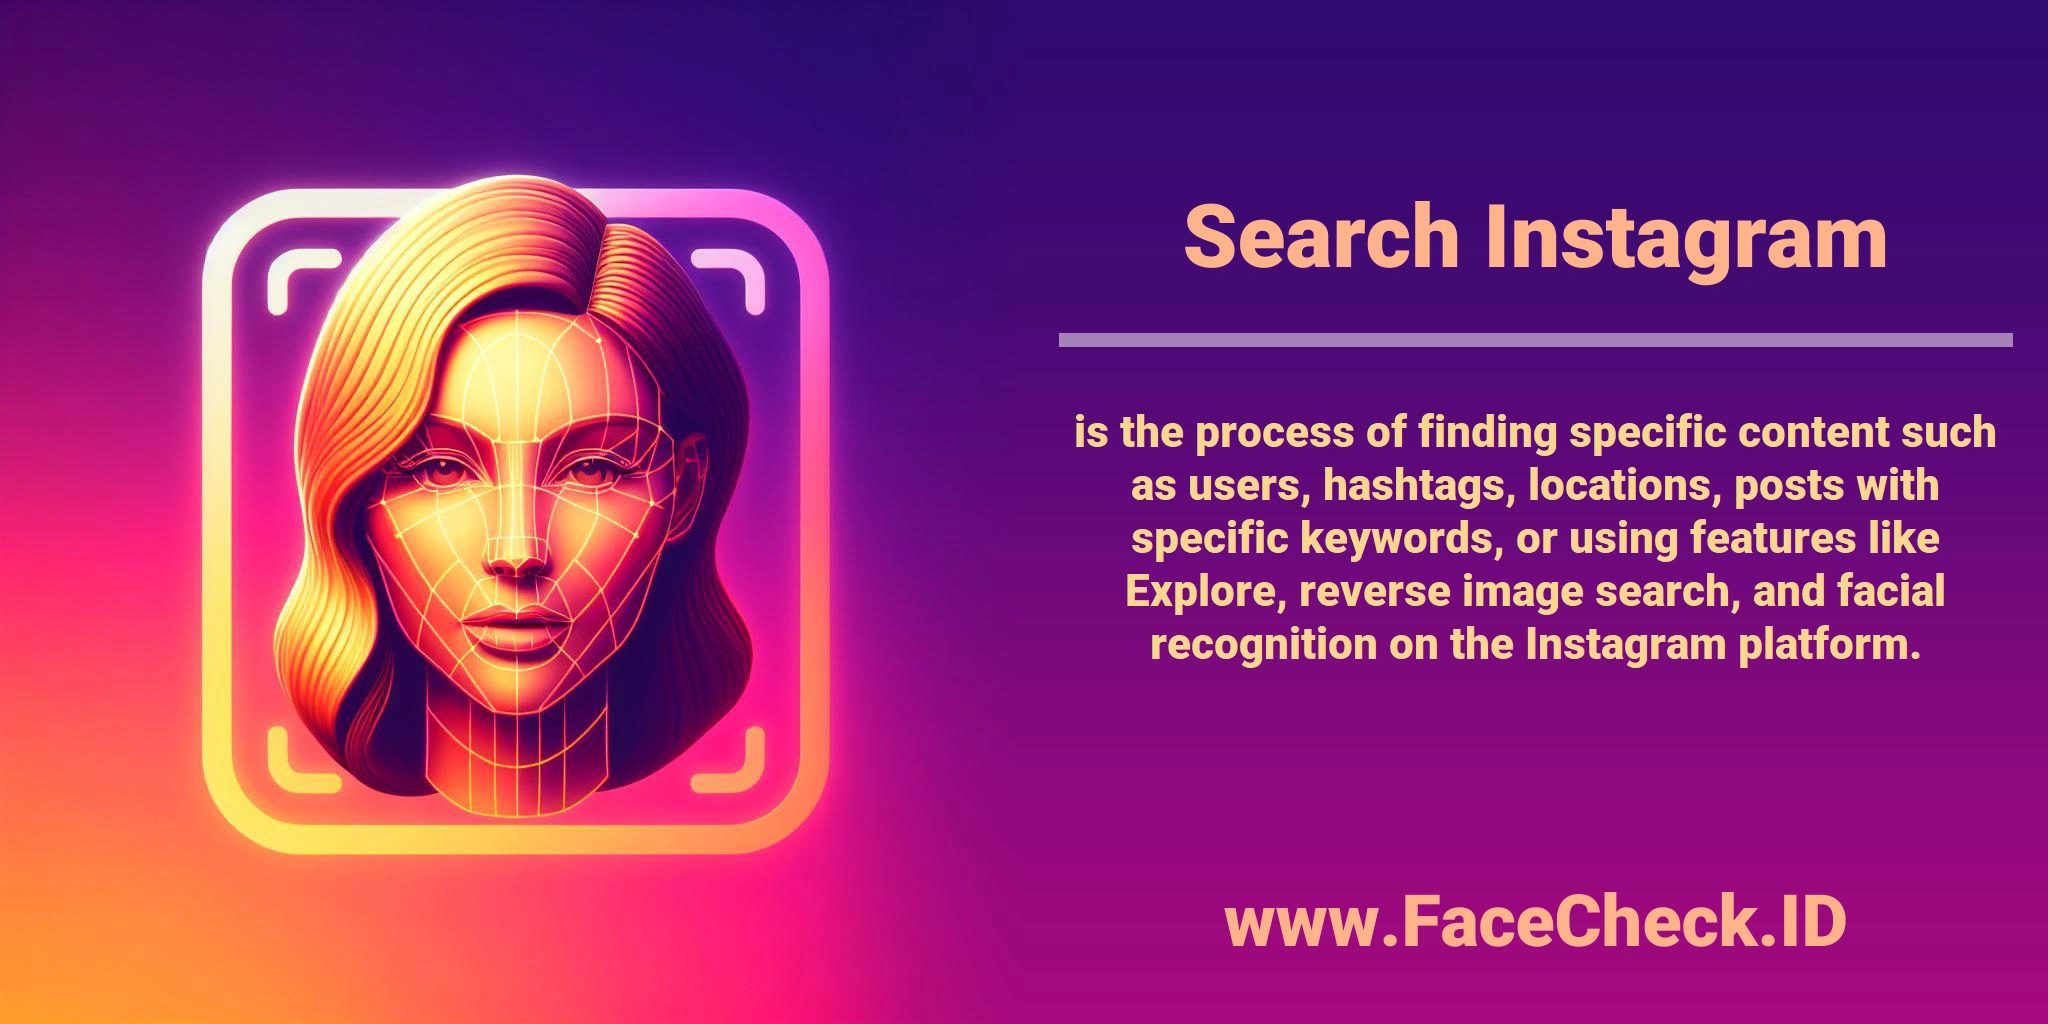 <b>Search Instagram</b> is the process of finding specific content such as users, hashtags, locations, posts with specific keywords, or using features like Explore, reverse image search, and facial recognition on the Instagram platform.